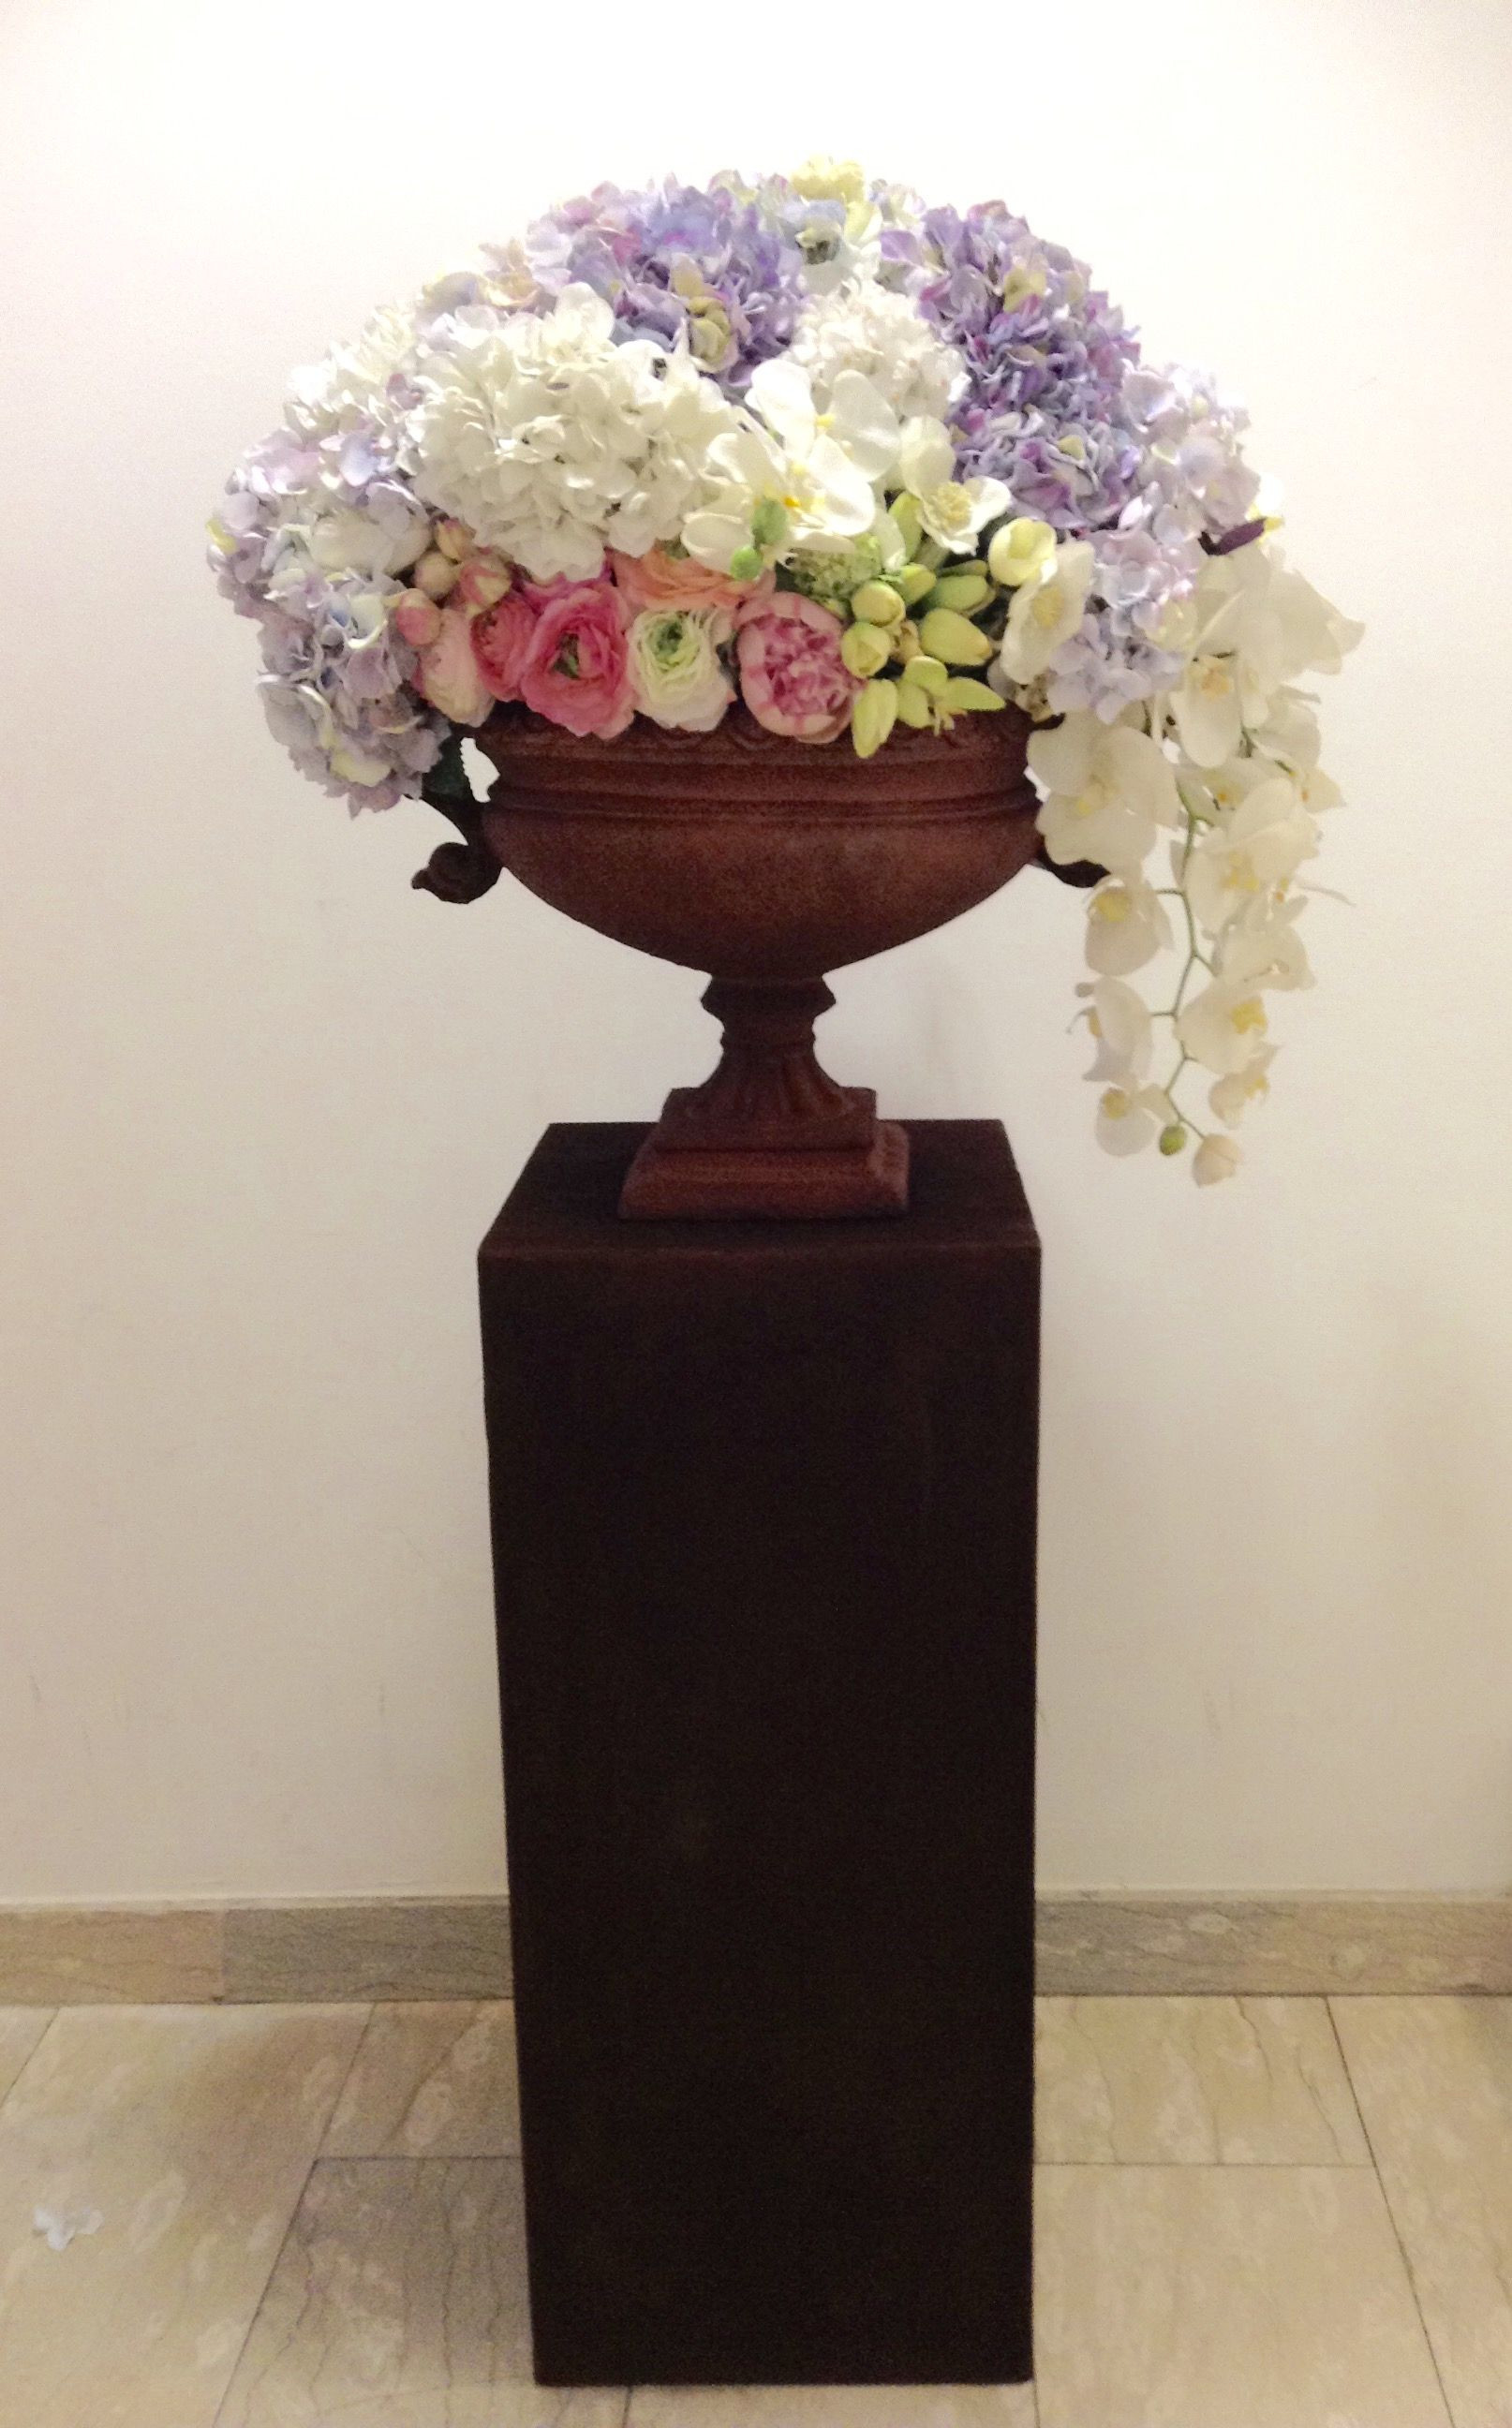 24 Stylish Pedestal Flower Vase 2024 free download pedestal flower vase of rusty big urn on rusty pedestal tuscan vases and glass accessories pertaining to rusty big urn on rusty pedestal